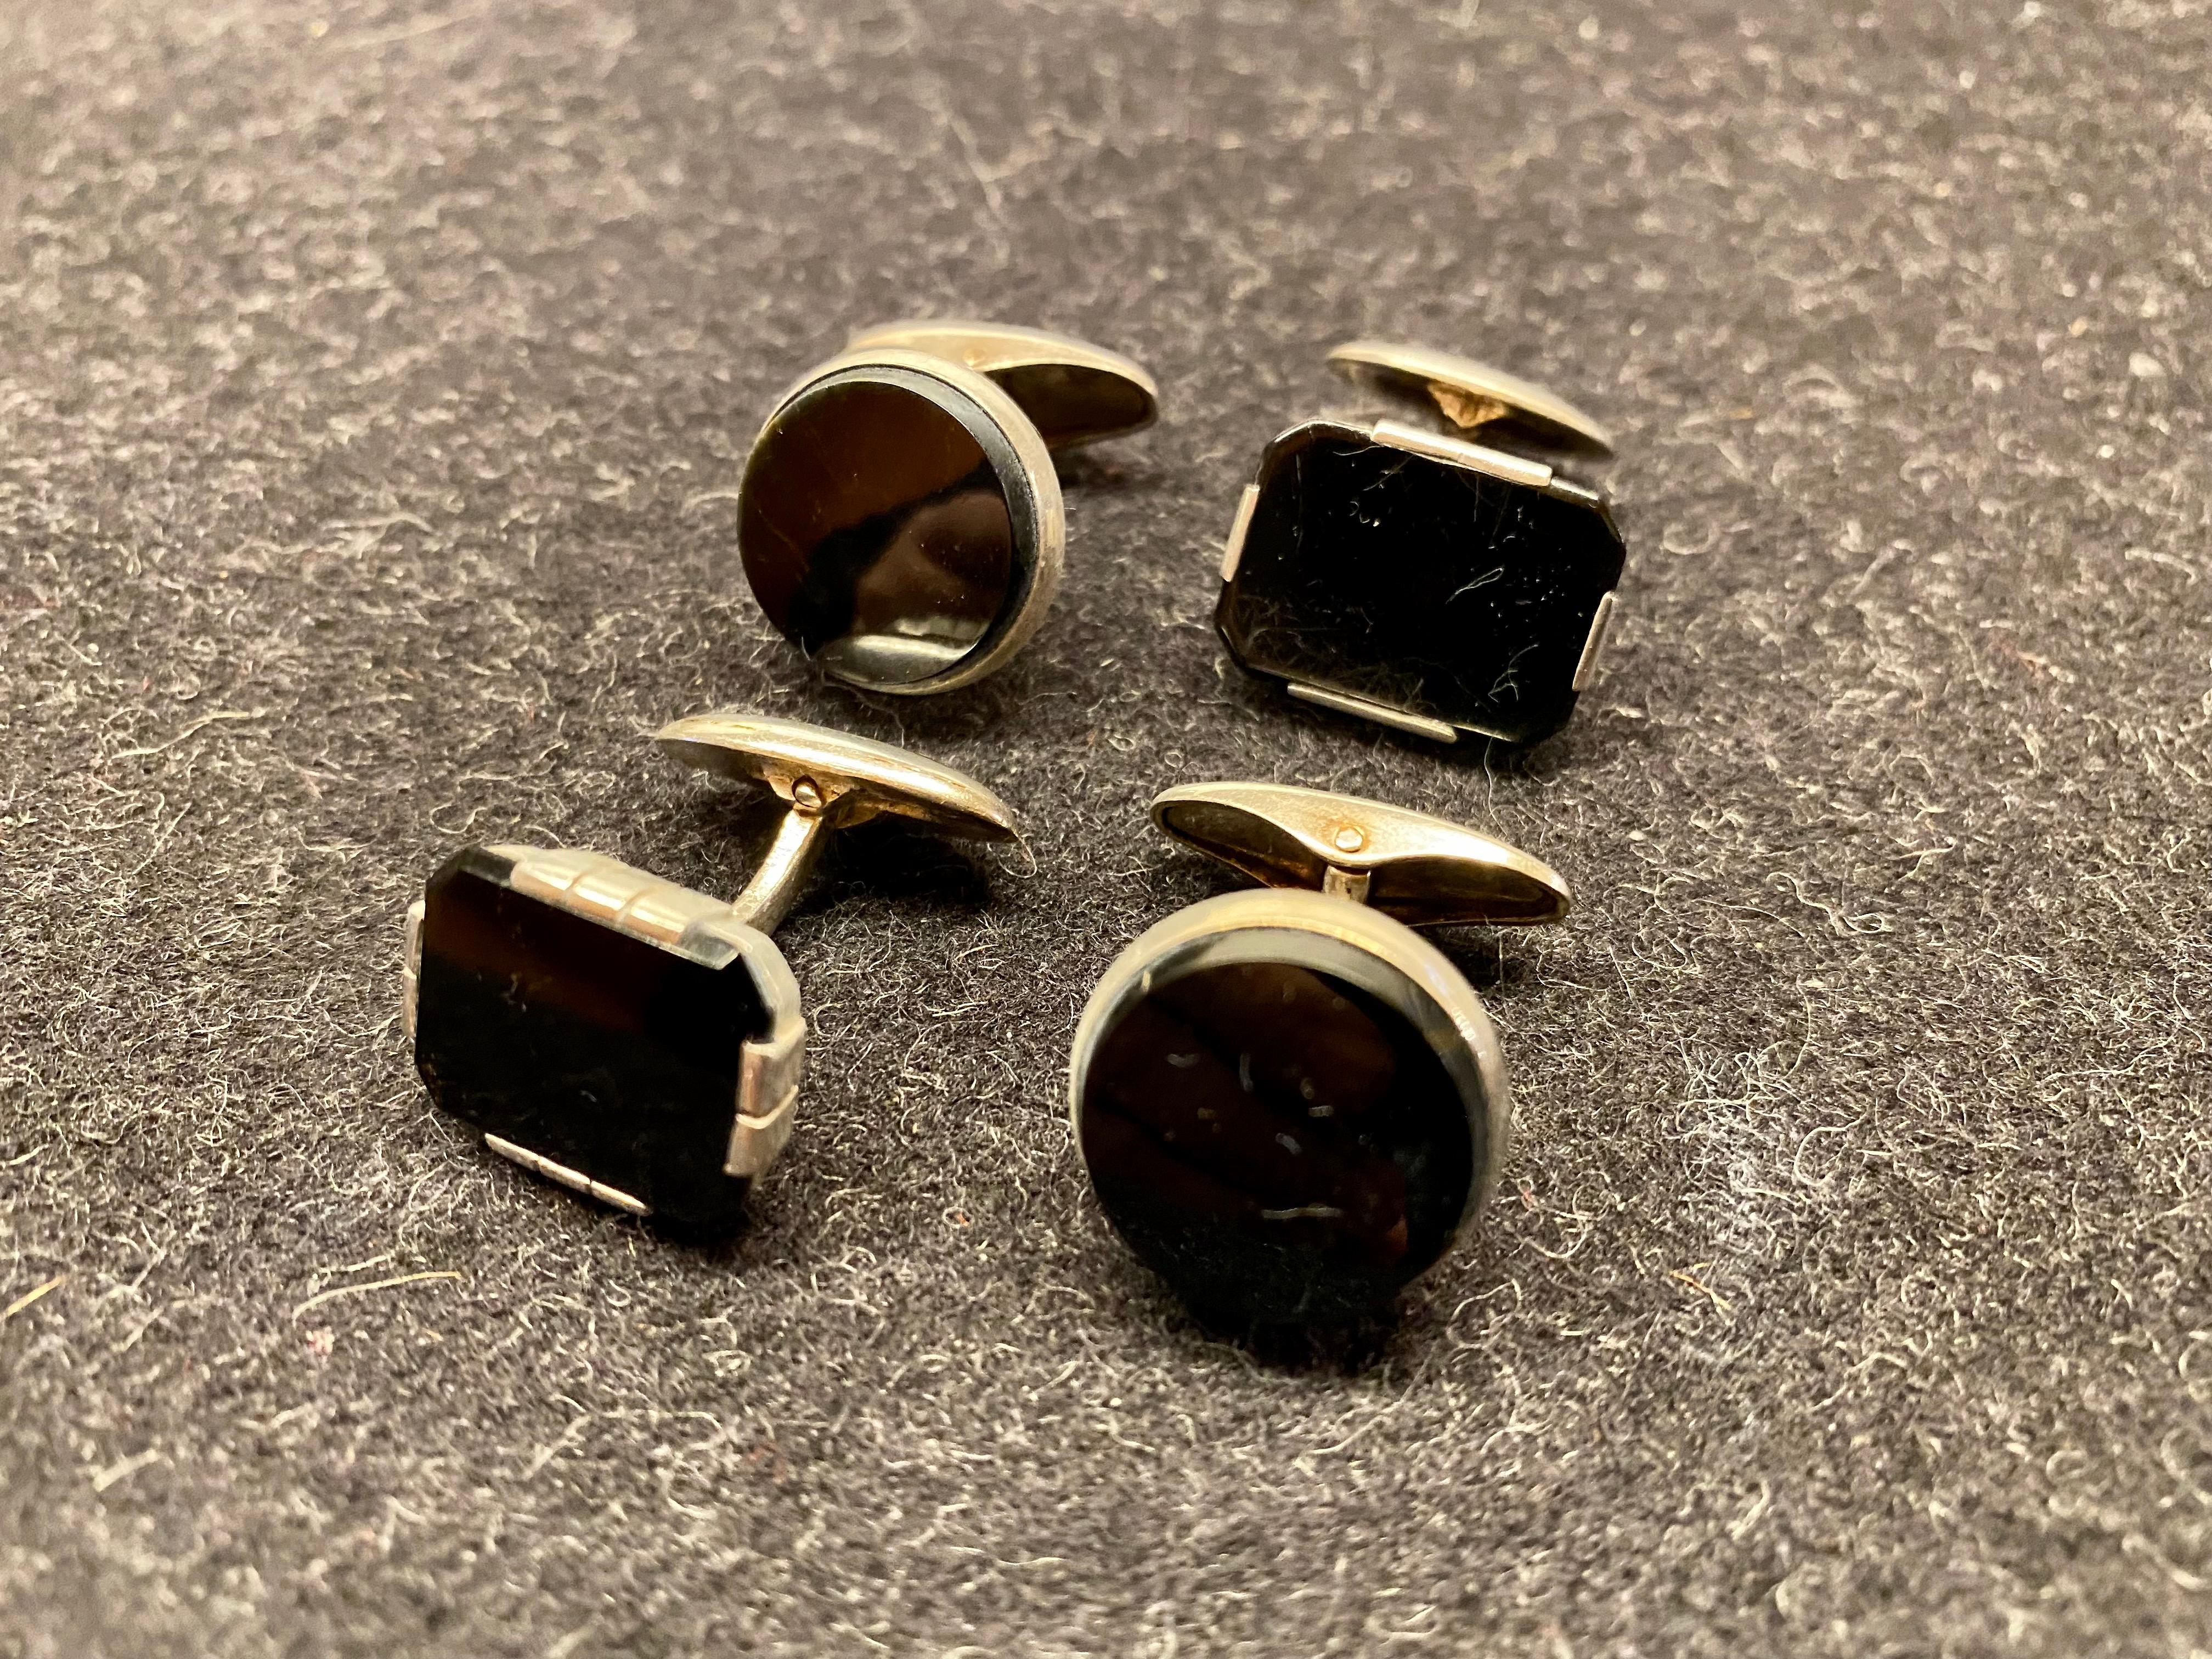 Silver and Onyx 2 Pair of Cufflinks Finland  Scandinavian Modern 
Silver 813H
Really great.
and 
Maker Square 1.9cm 
Lahti 1956 Jalosepot Oy Jase 1950-1994
Maker Round 1.6cm wide.
Helsinki Osvald Mättö 1966 OM 1952-1982
Round initials RJ